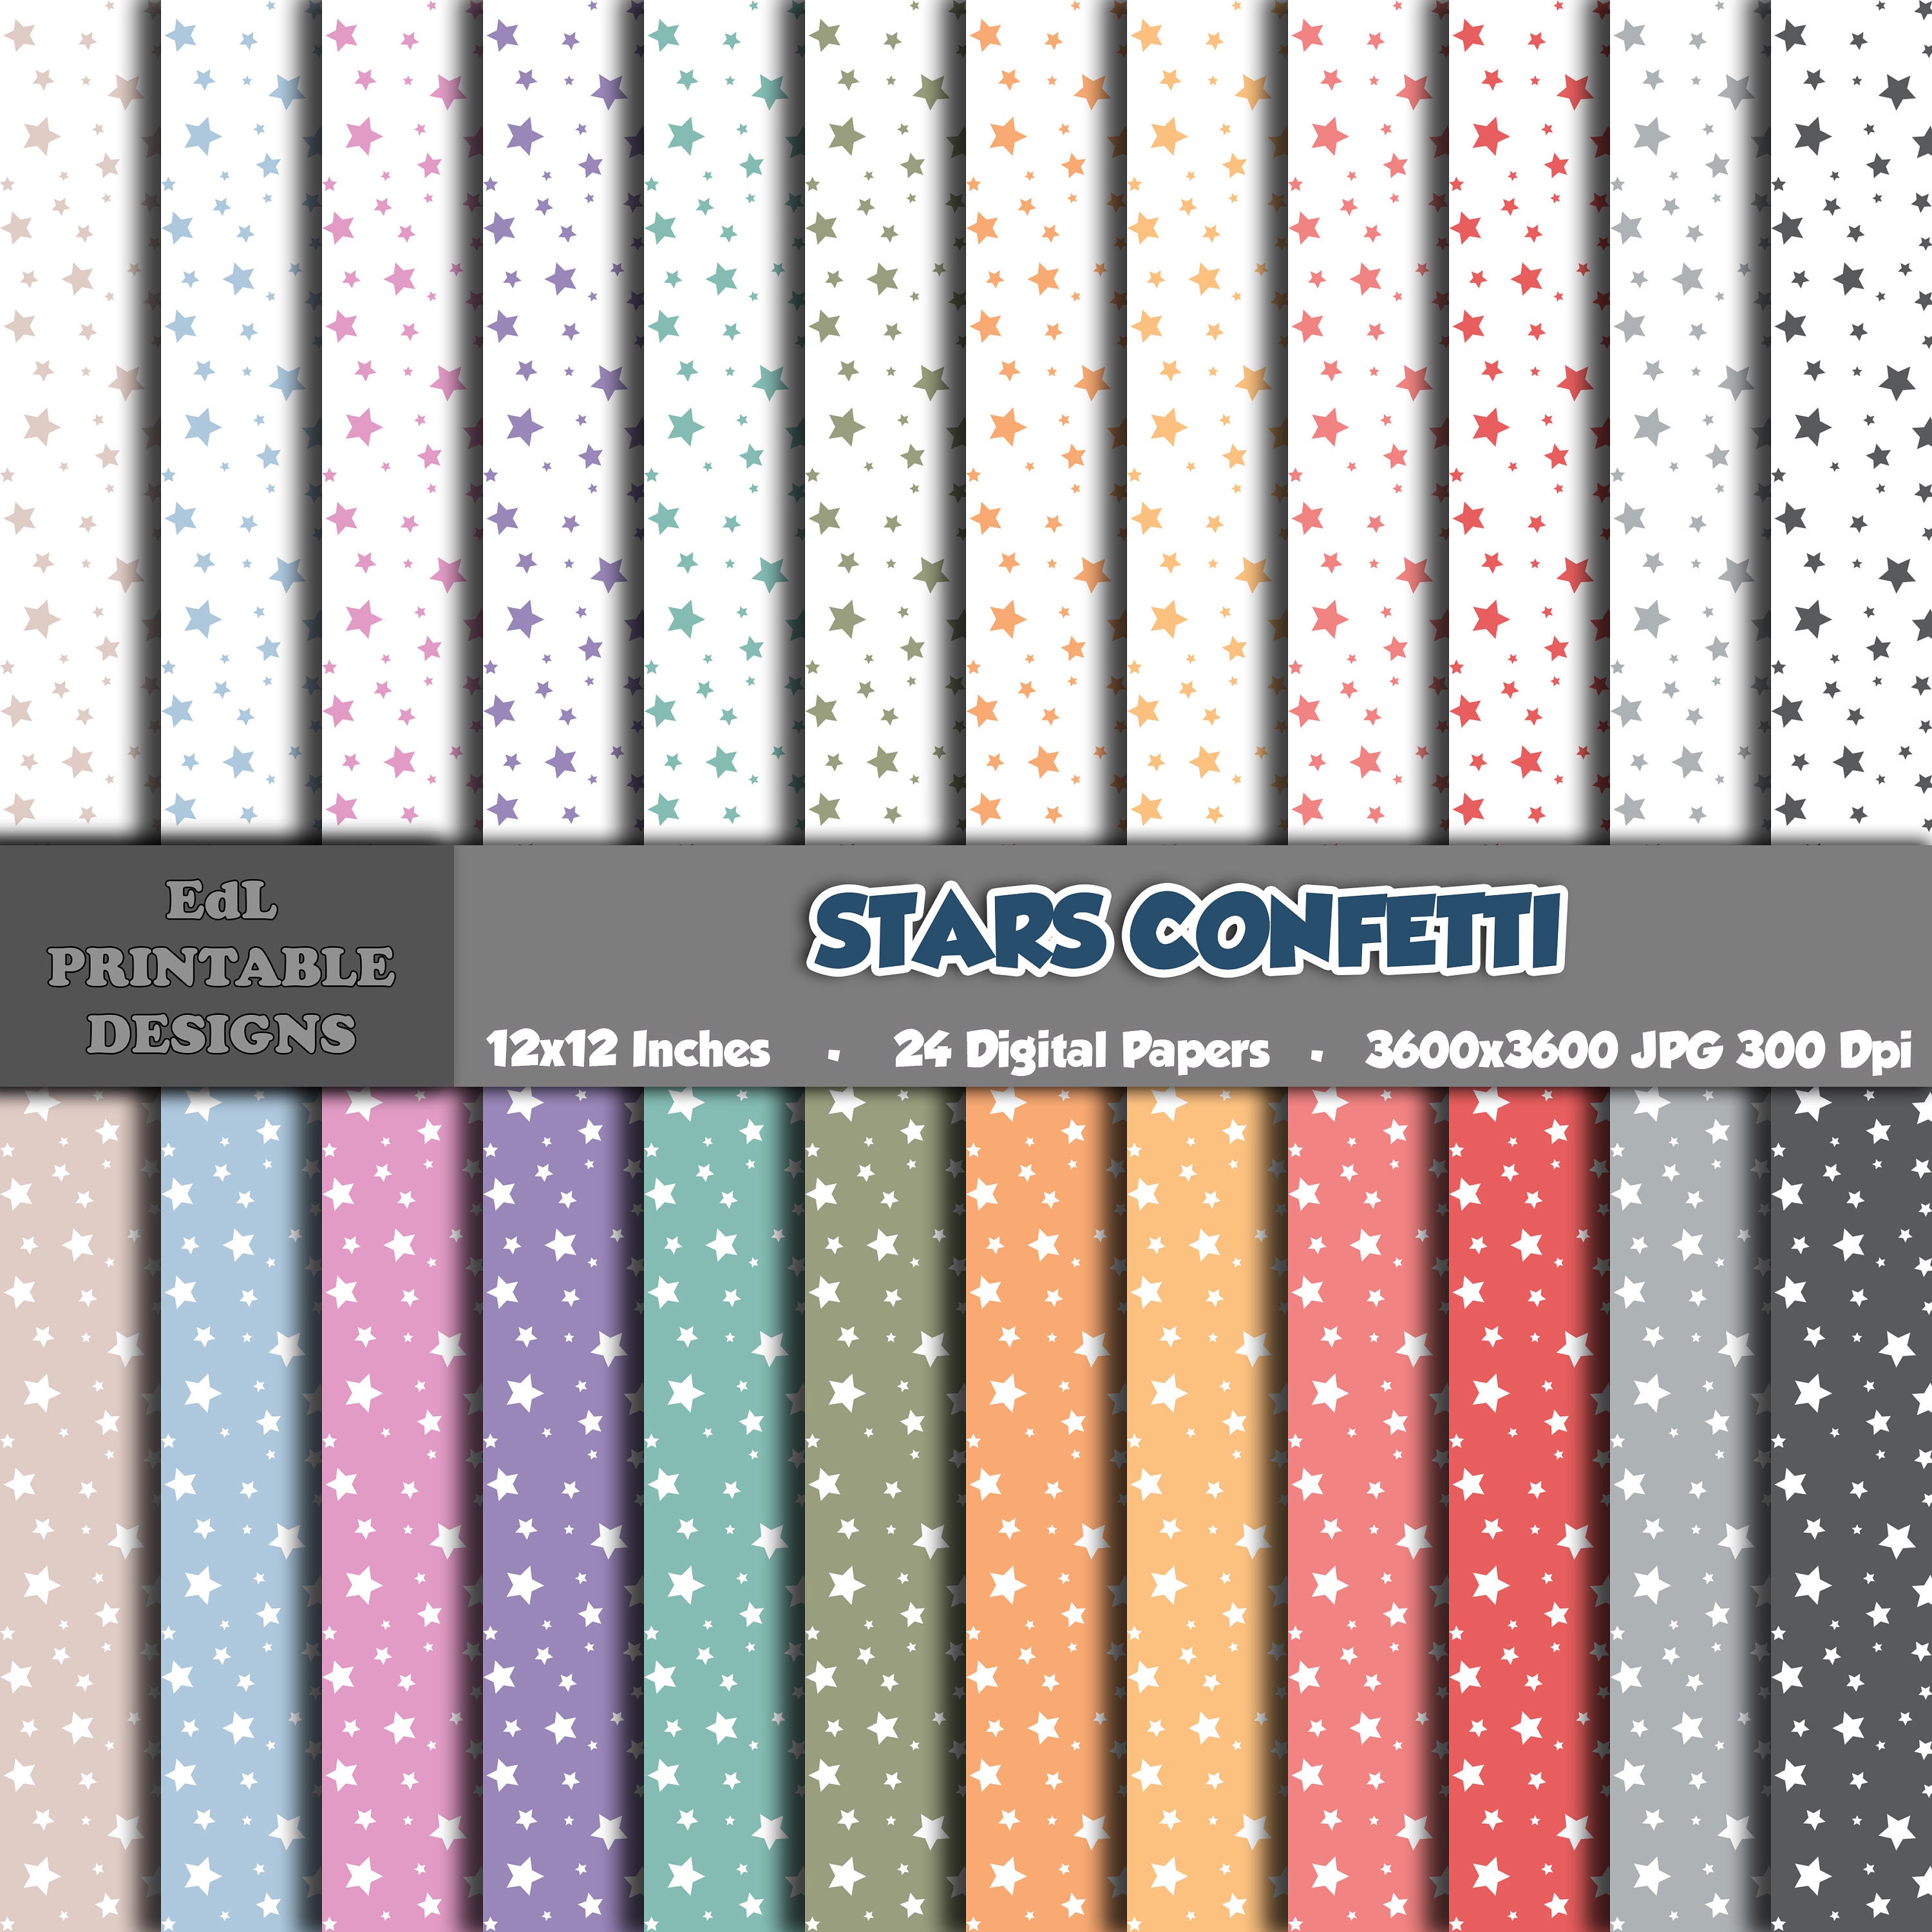 New Year Digital Paper, 2024 Scrapbook Papers, Confetti Background